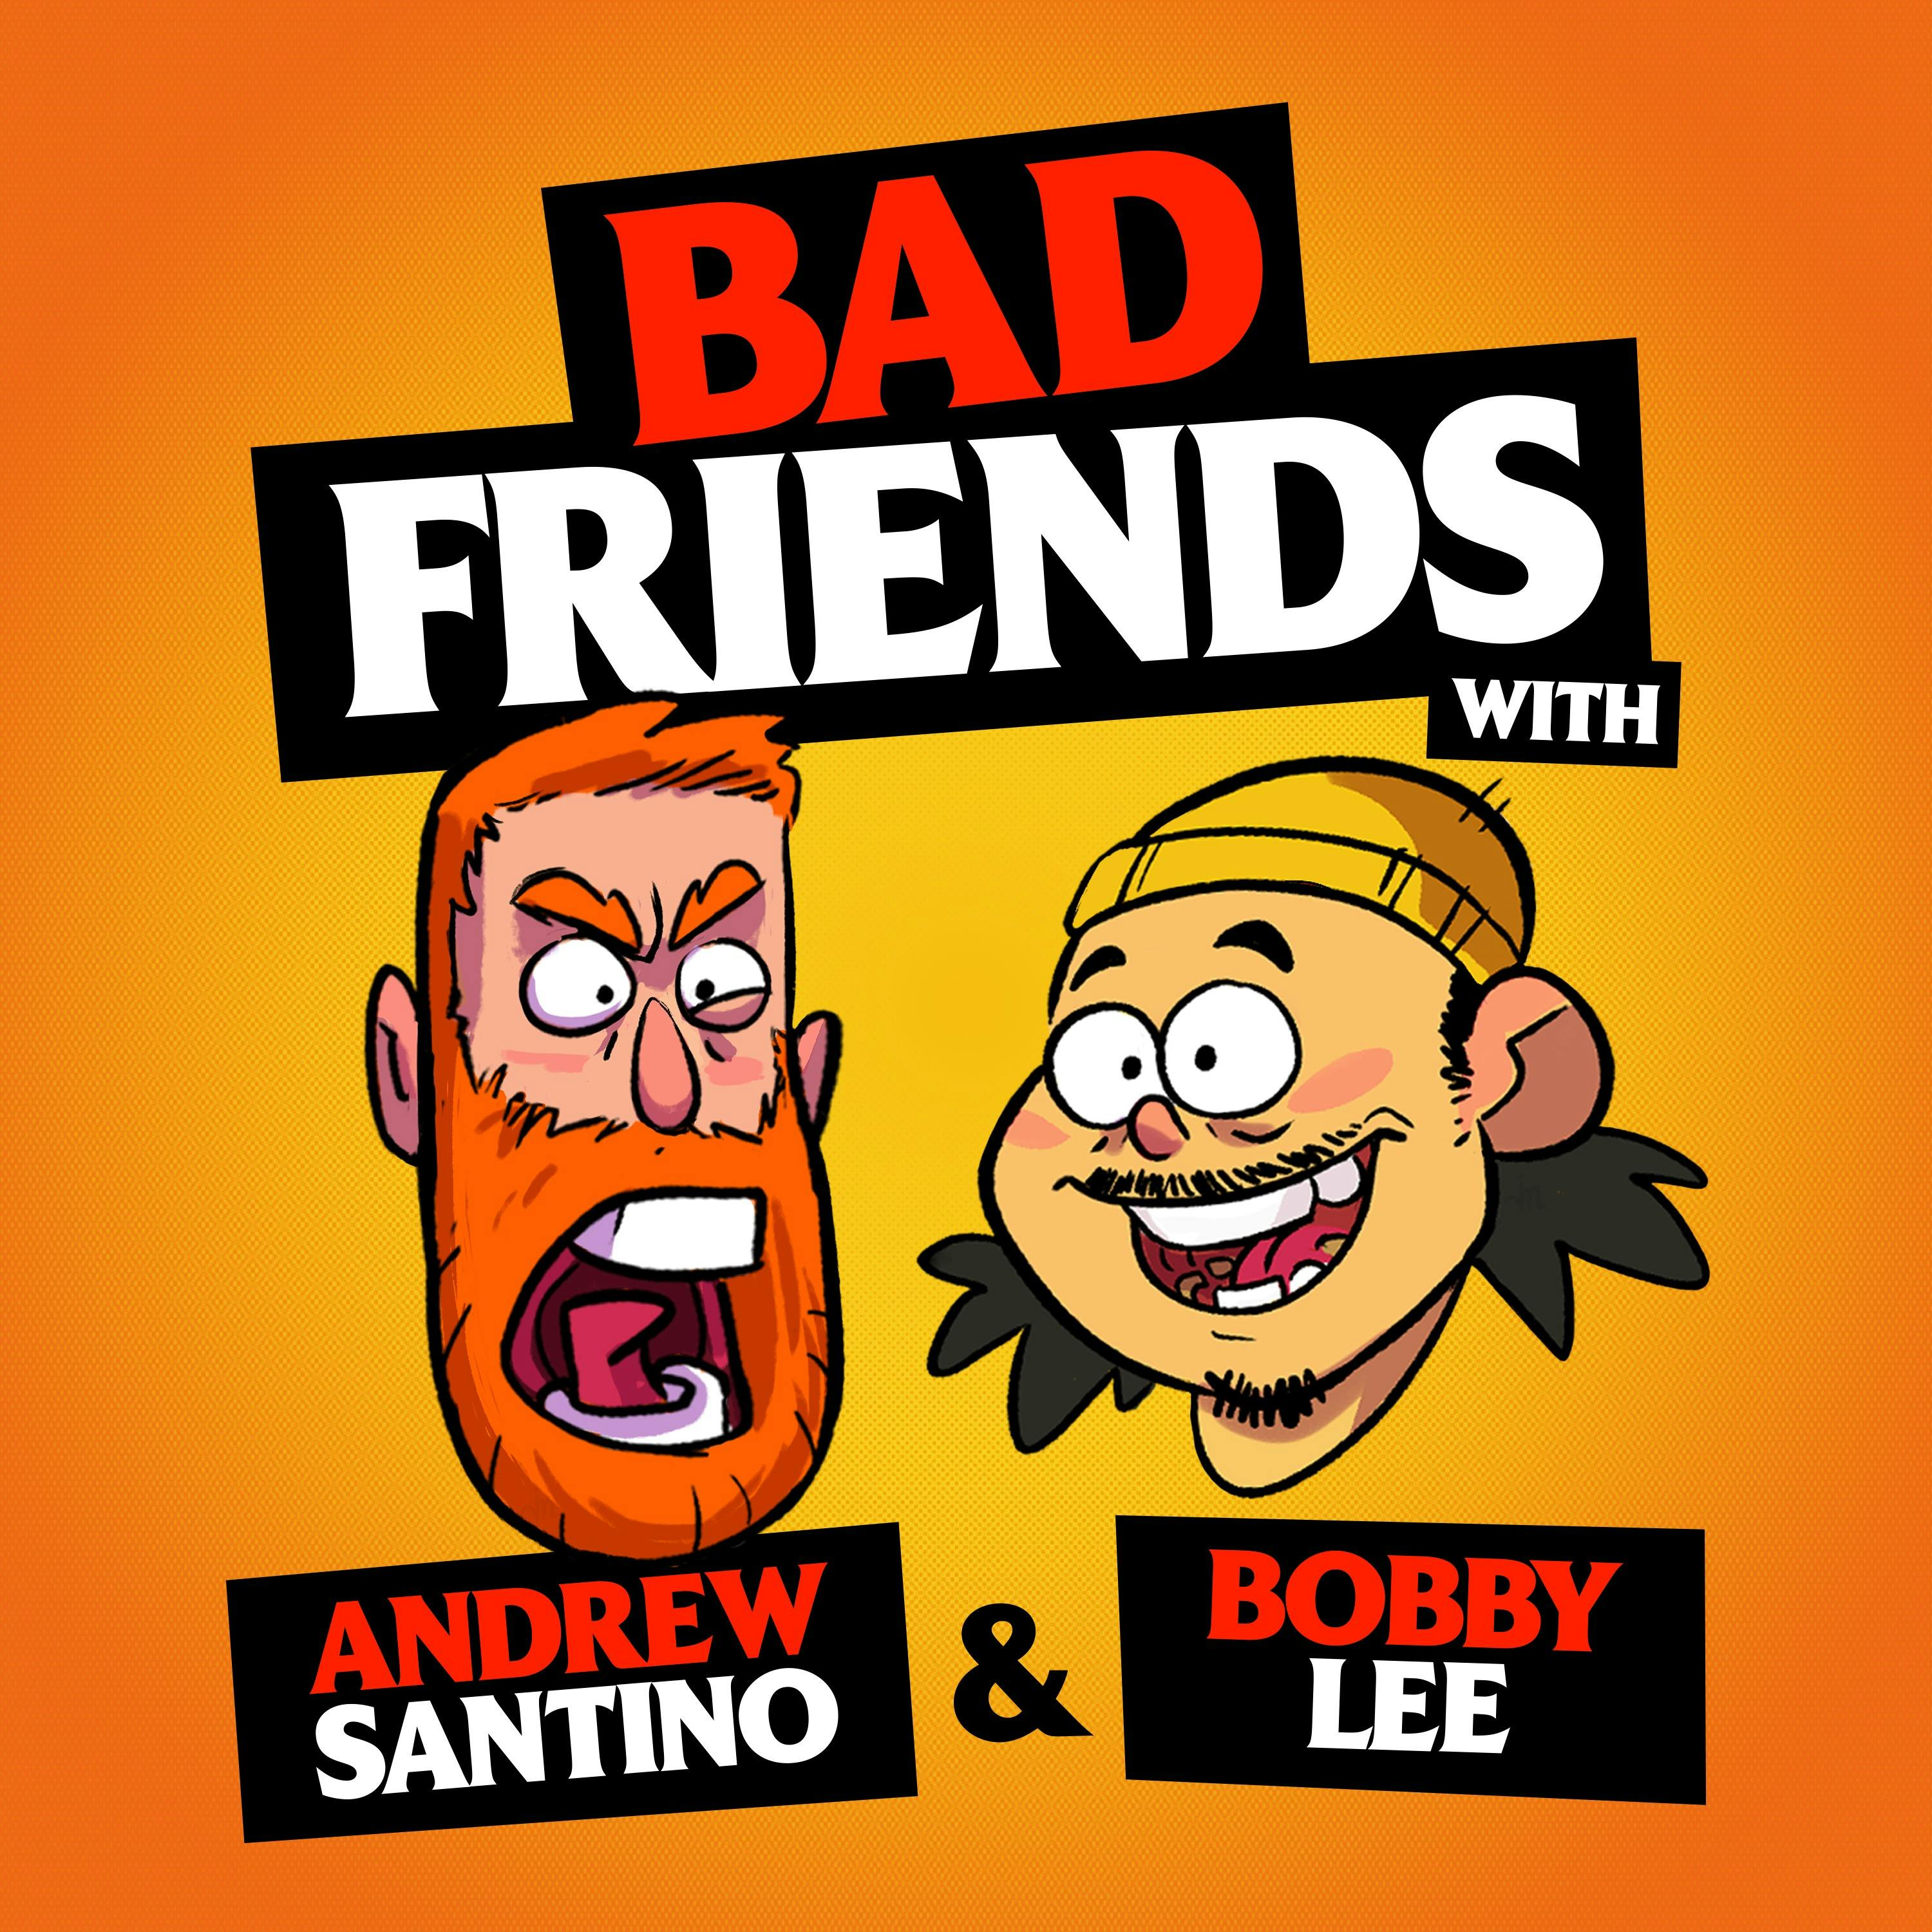 Bad Friends Worldwide by Andrew Santino and Bobby Lee